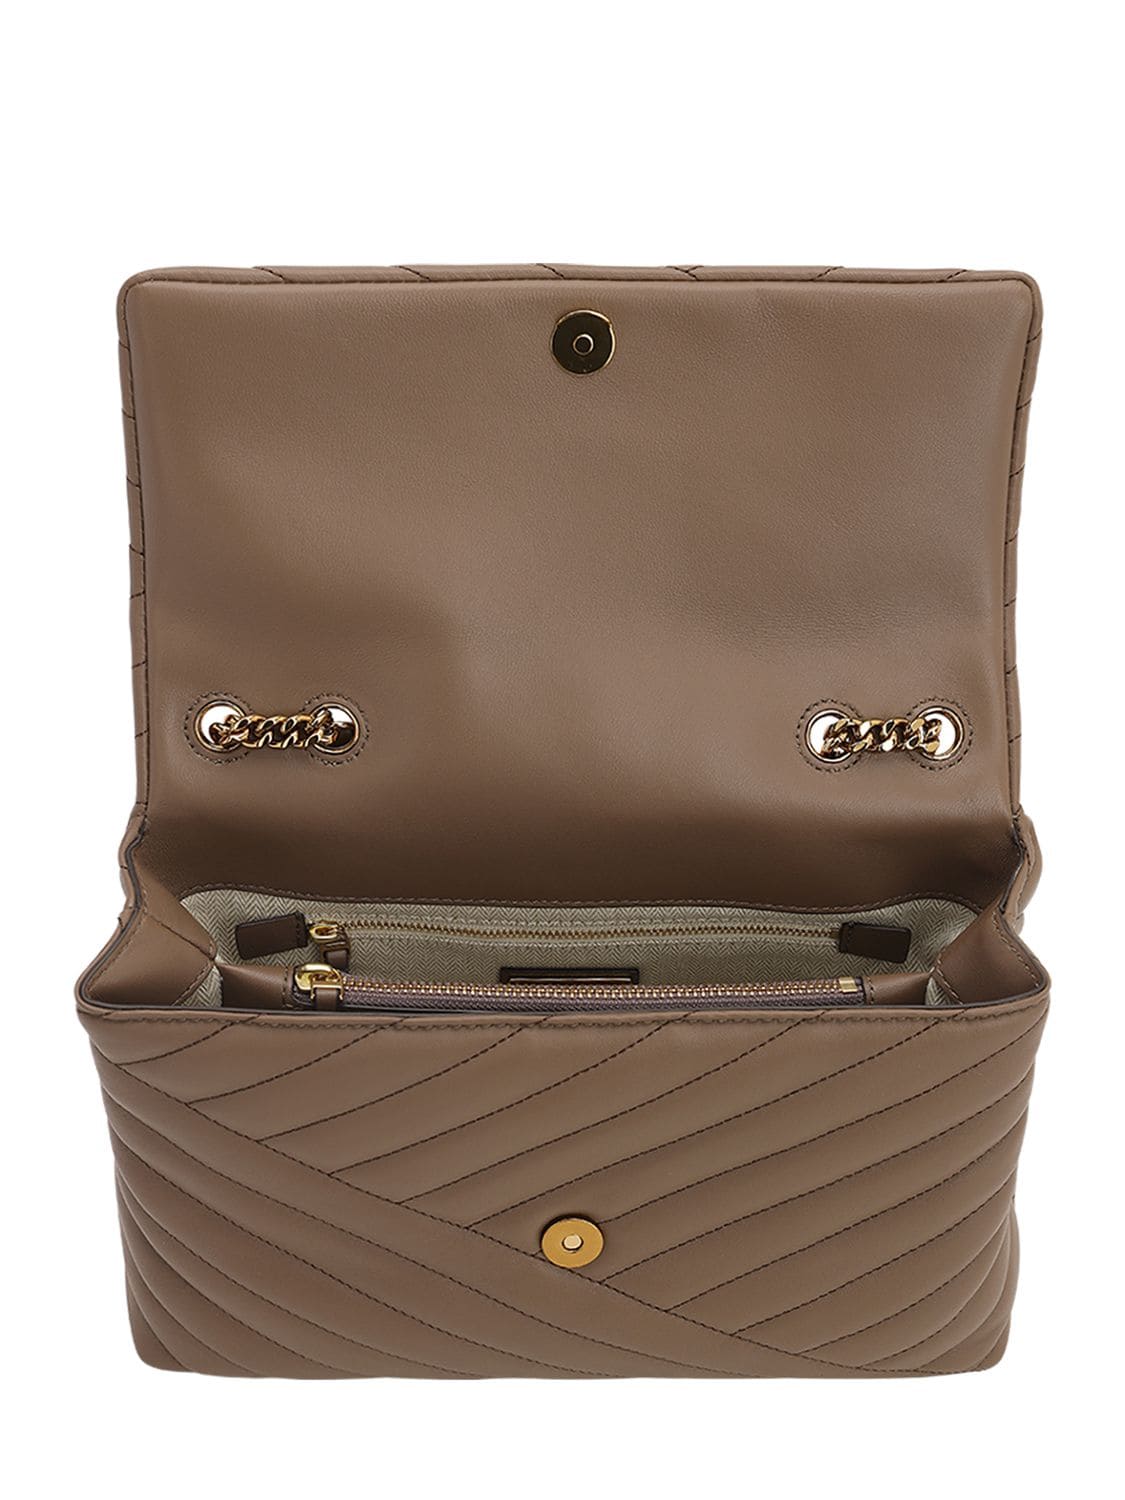 Tory Burch Kira Chevron Quilted Leather Shoulder Bag - Brown In 294 Classic Taupe | ModeSens